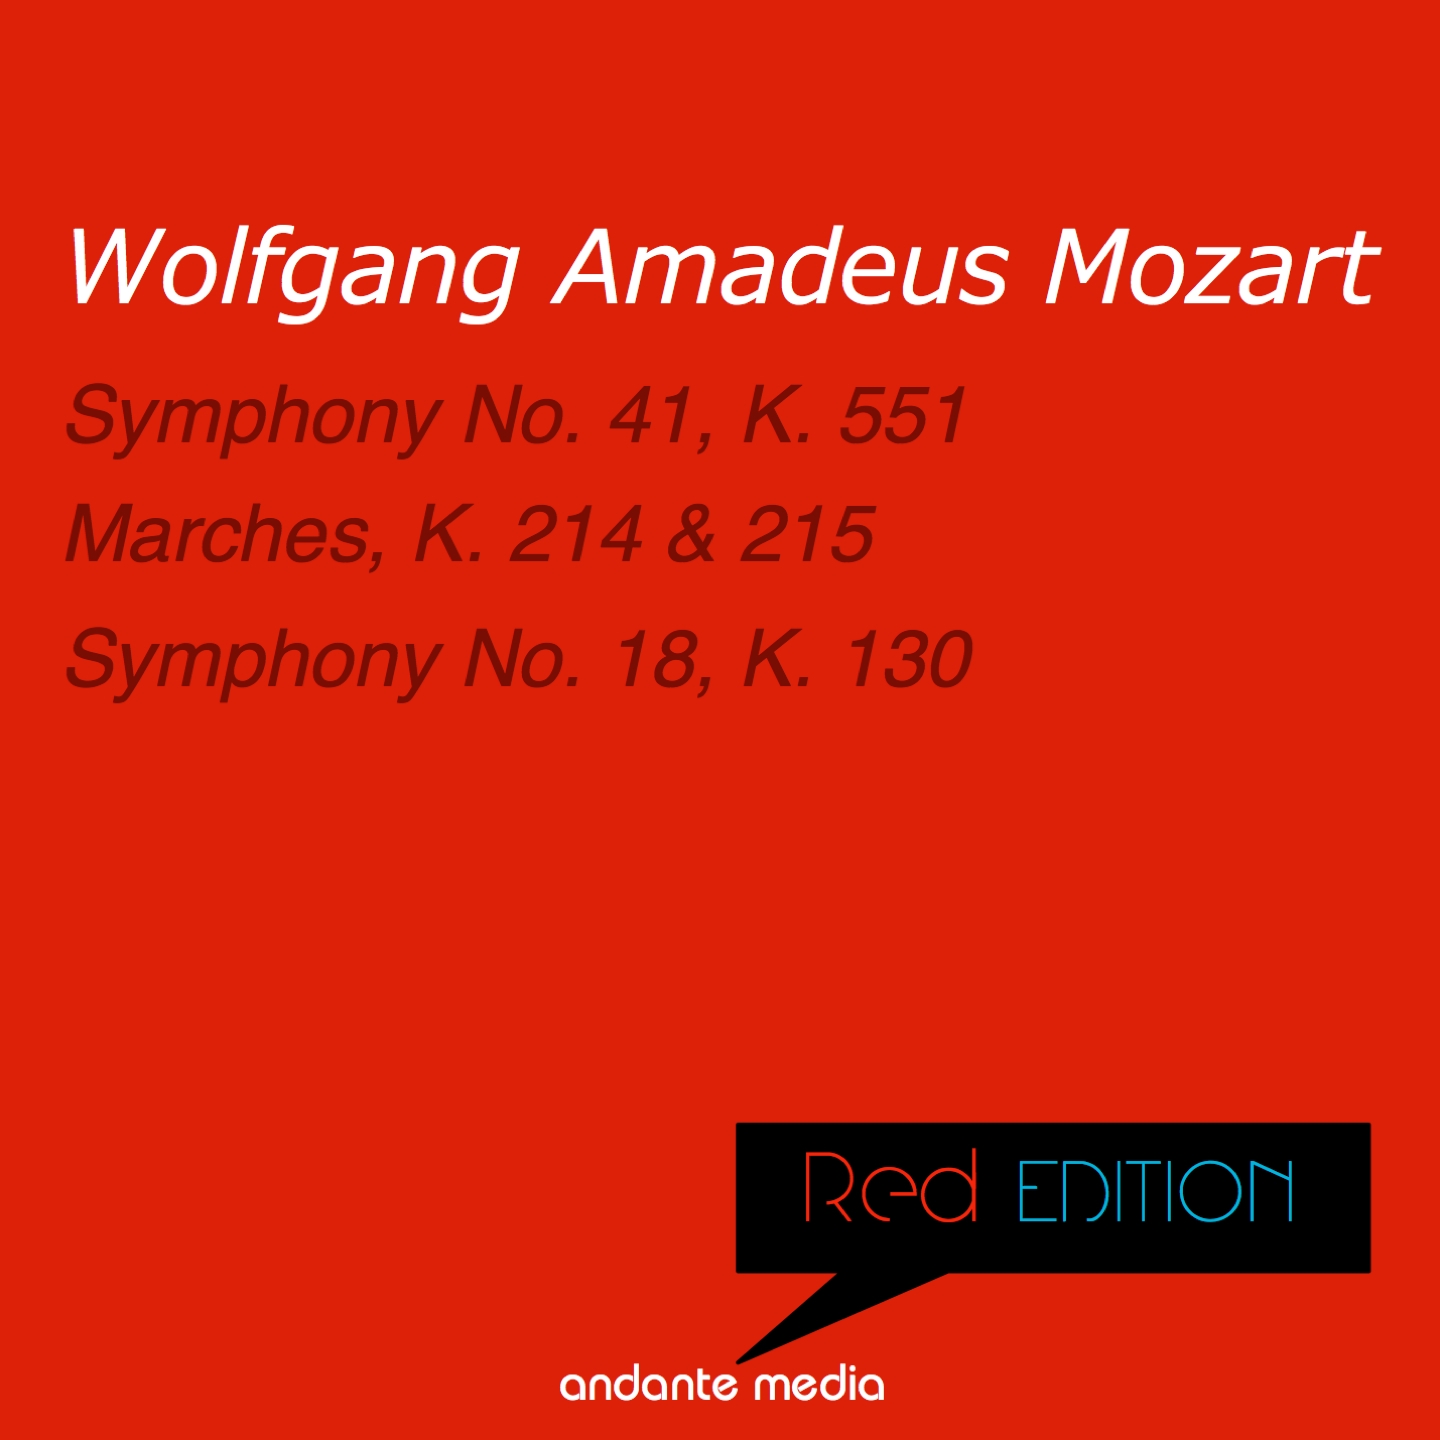 Red Edition - Mozart: Symphonies Nos. 41, 18 & Marches, K. 214, 215